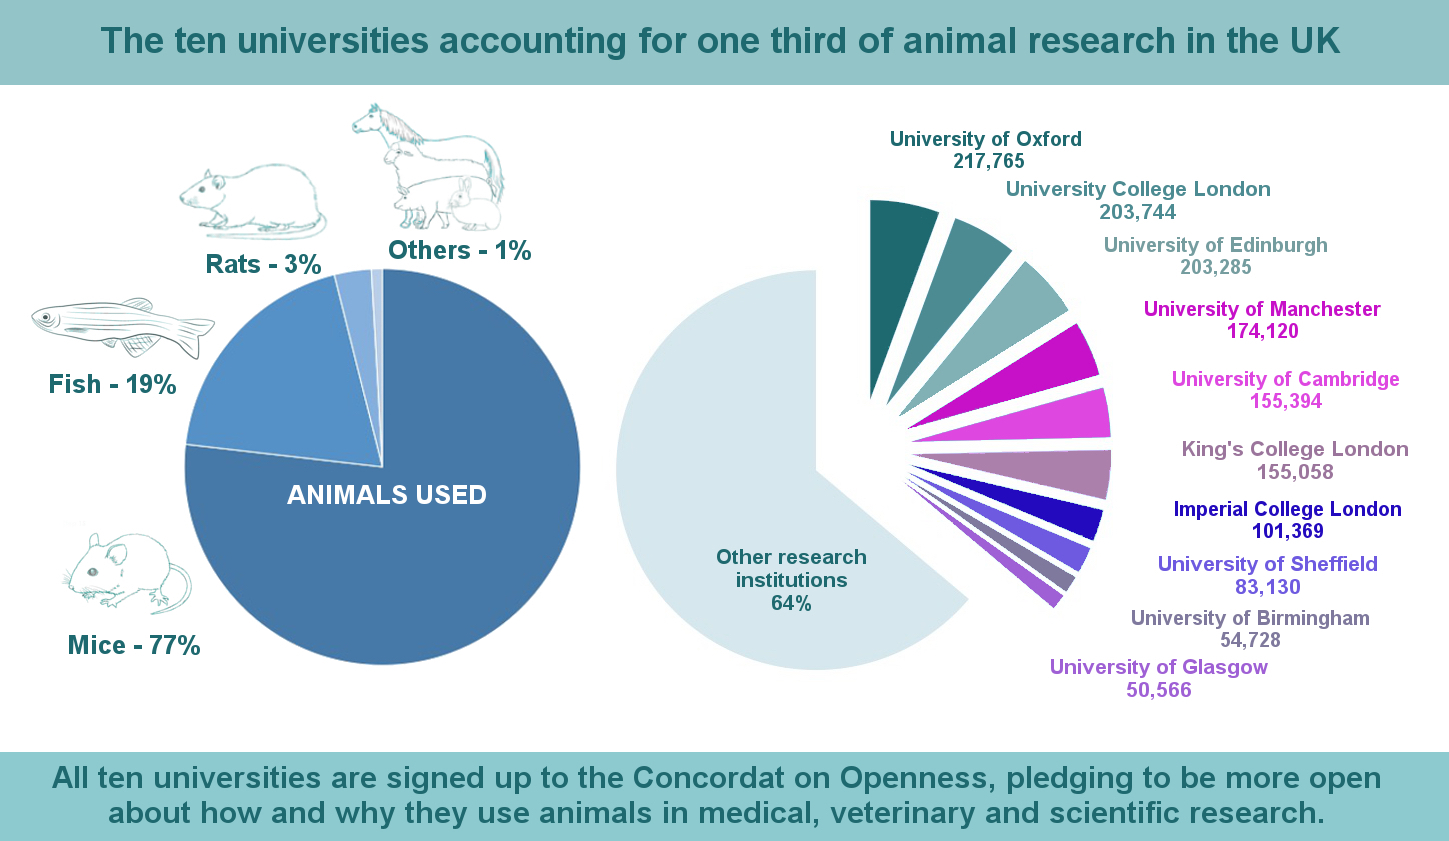 Infographic_on_ten_universities_using_most_animals_for_research_in_the_UK.jpg